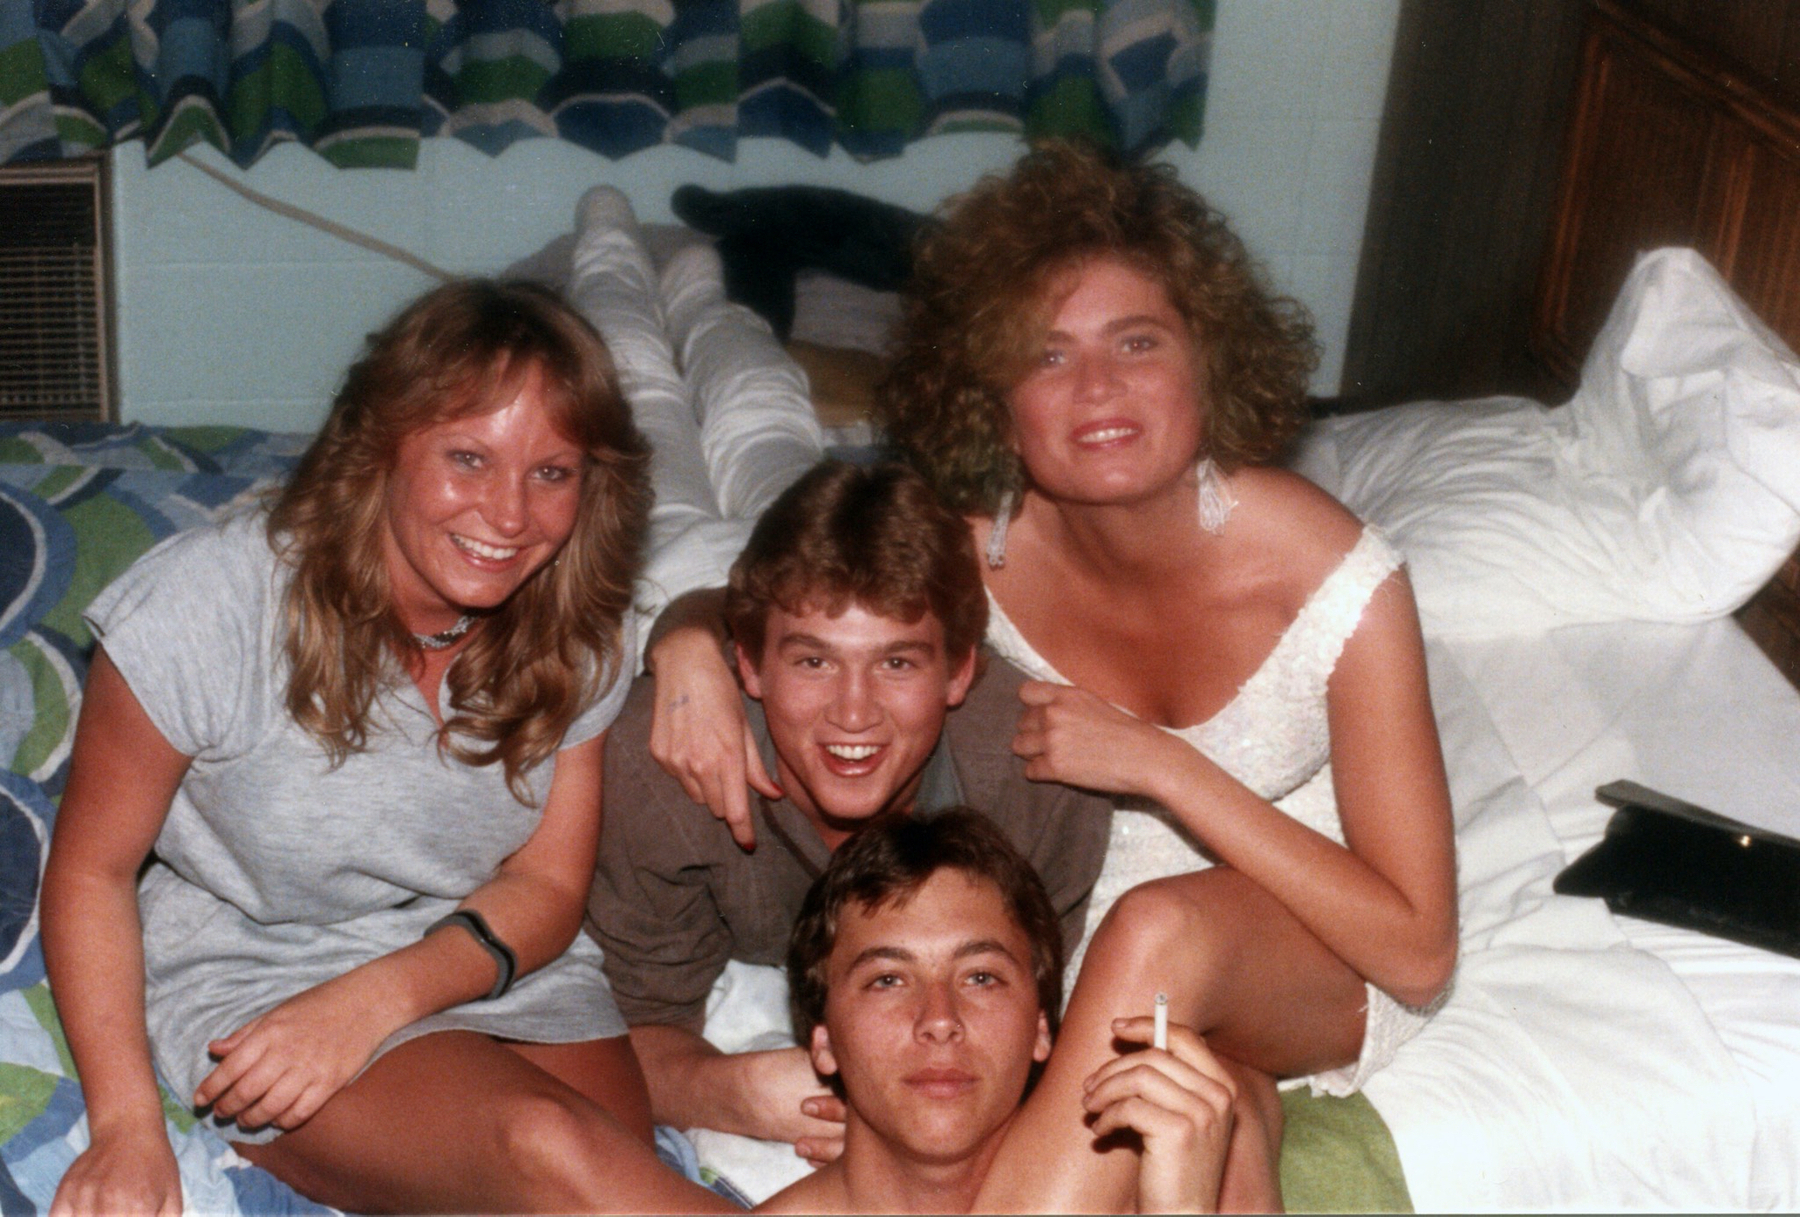 Smoking in the motel room with some new friends during Spring Break (1985)